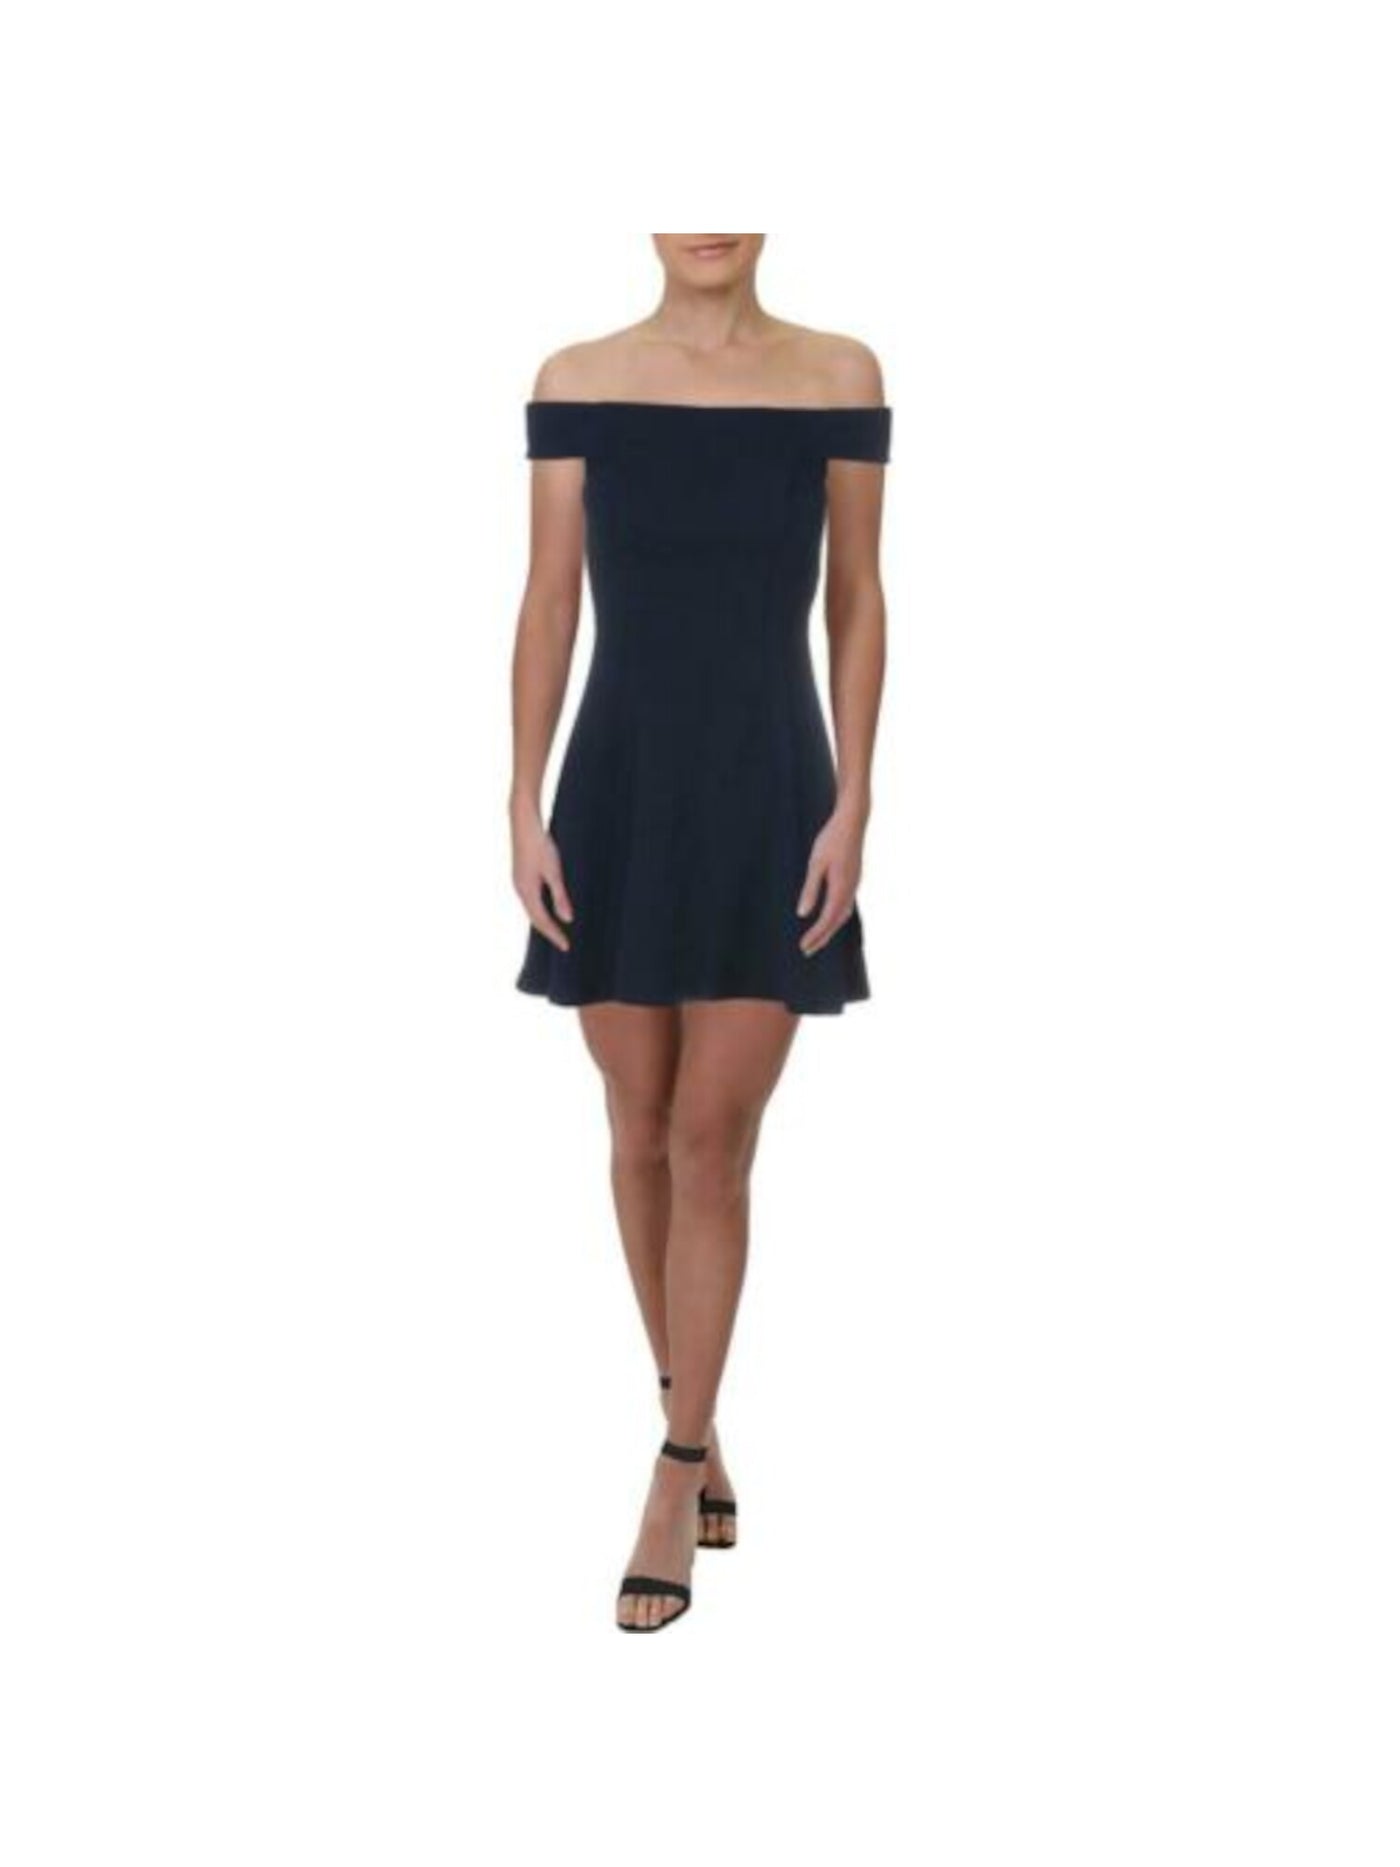 TEEZE ME Womens Navy Short Sleeve Micro Mini Fit + Flare Party Dress Juniors 1